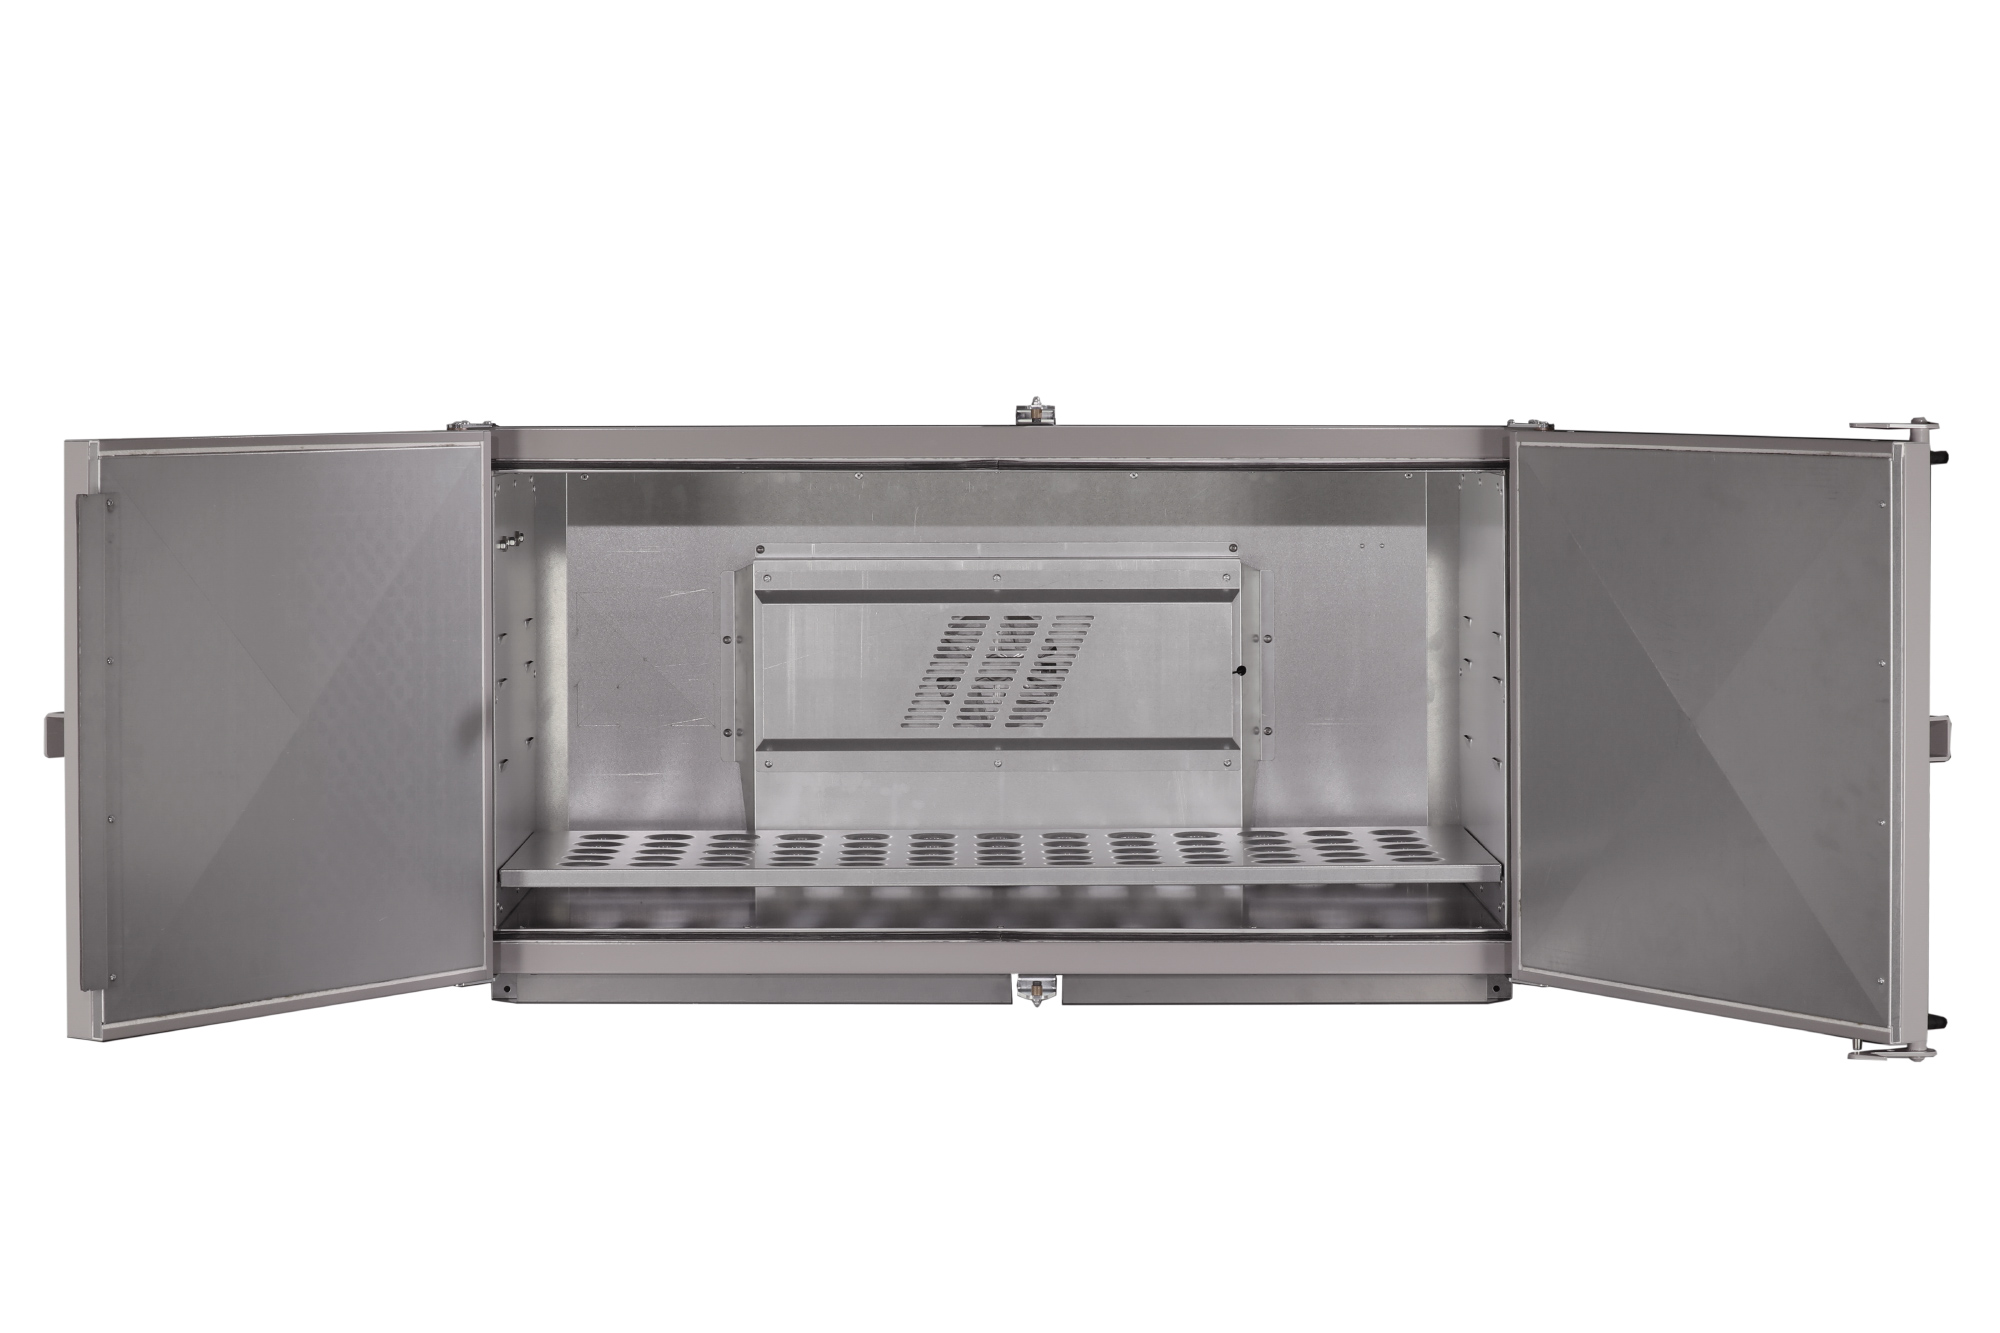 Composite Ovens/ Curing Ovens- Withnell Sensors